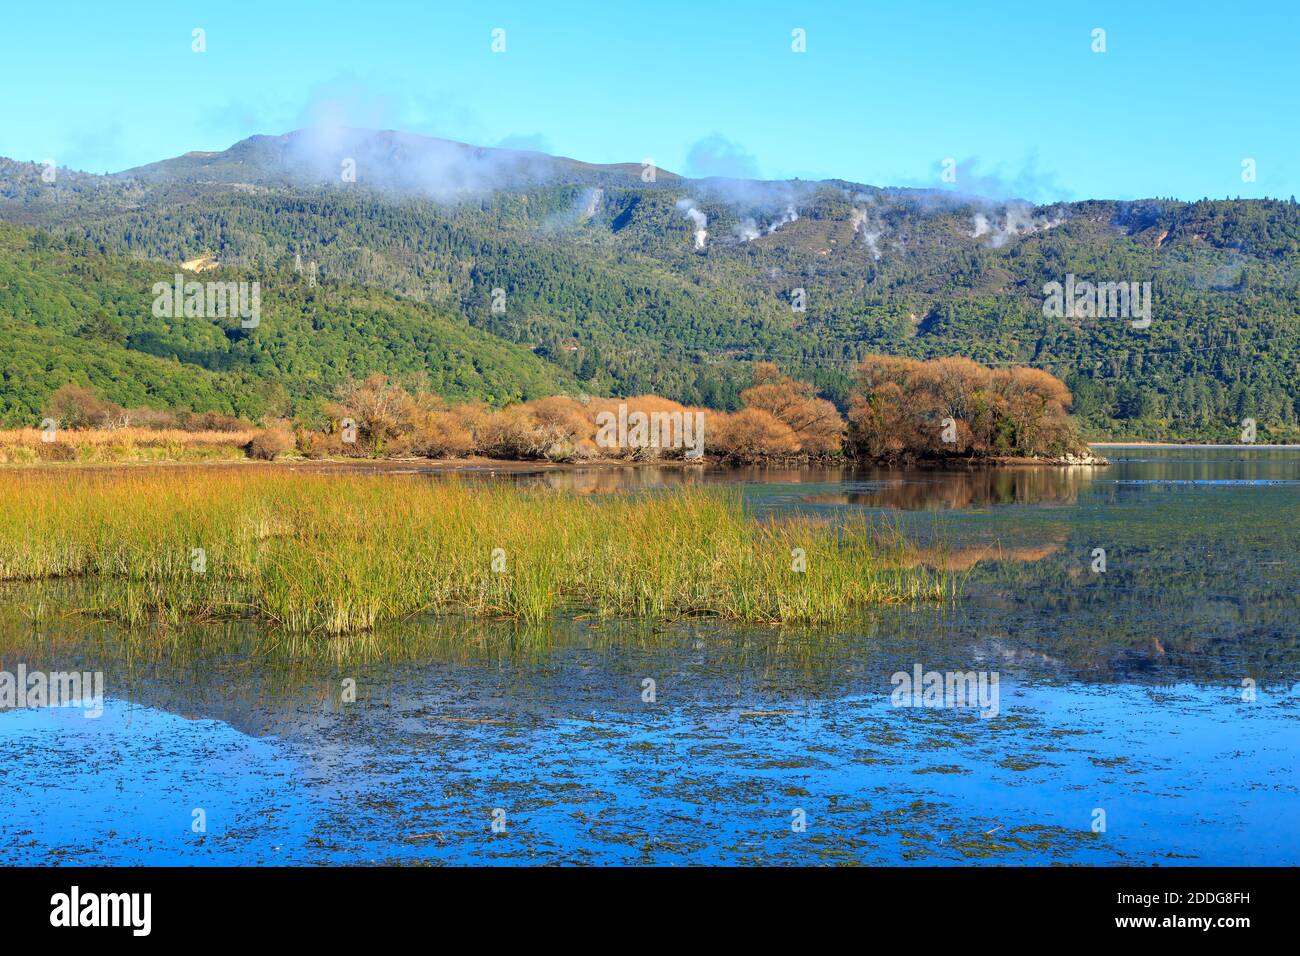 Lake Taupo, New Zealand, in autumn. Trees with fall foliage grow on the shore and steam rises from geothermal vents in the mountains Stock Photo